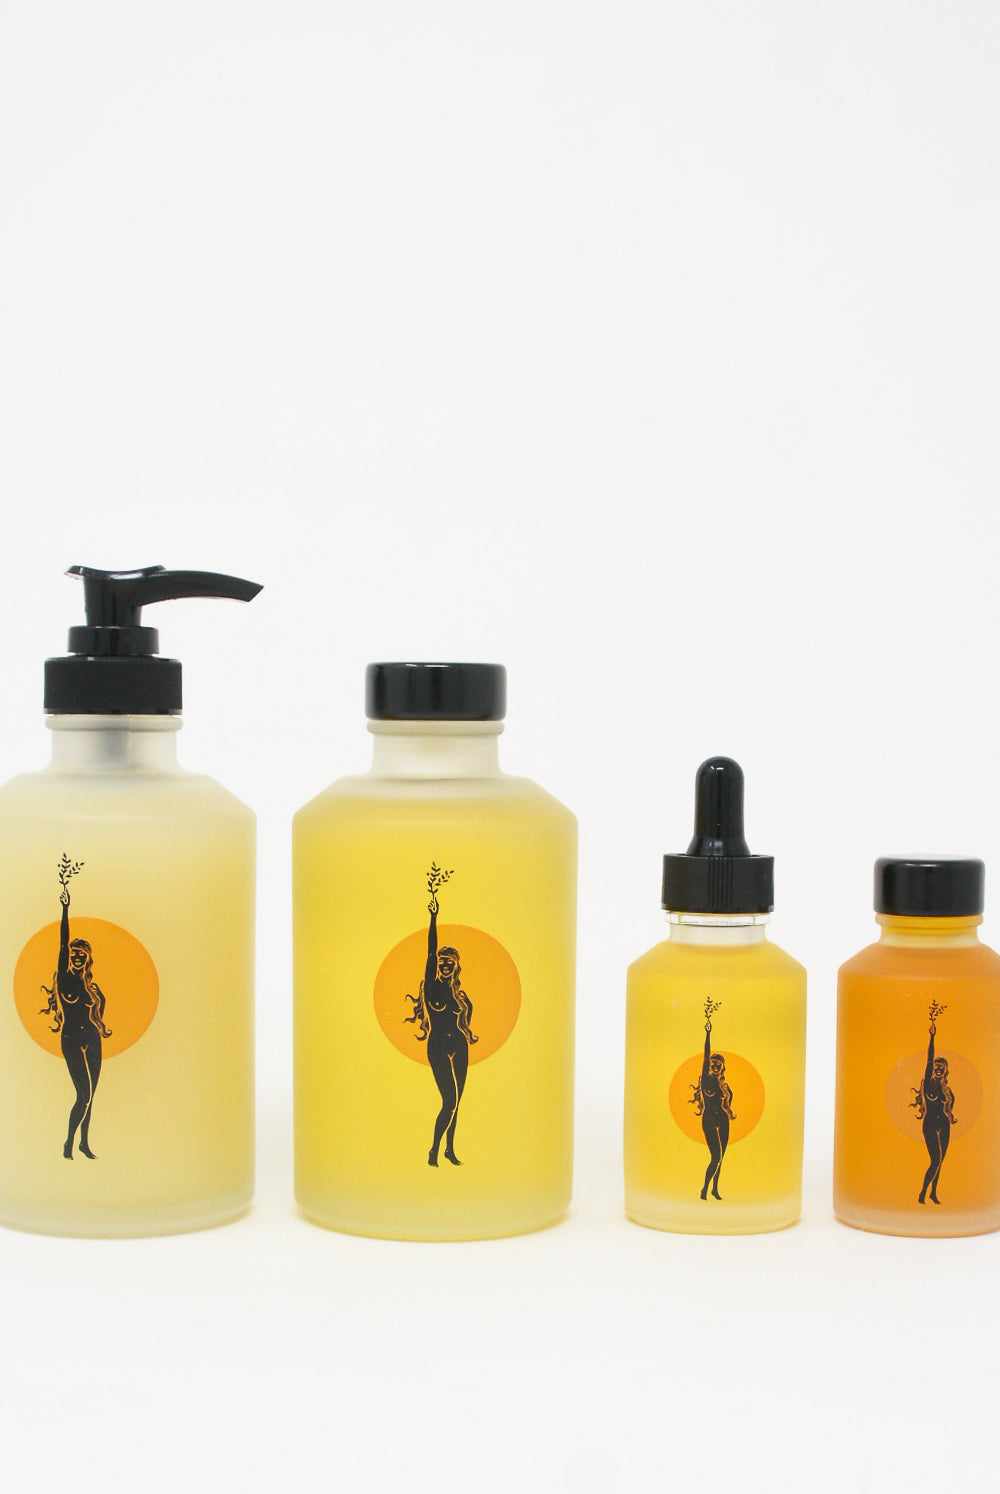 A collection of Wonder Serum bottles featuring a woman's face adorned with hyaluronic acid, bioactive peptides, and sea lavender from Wonder Valley.